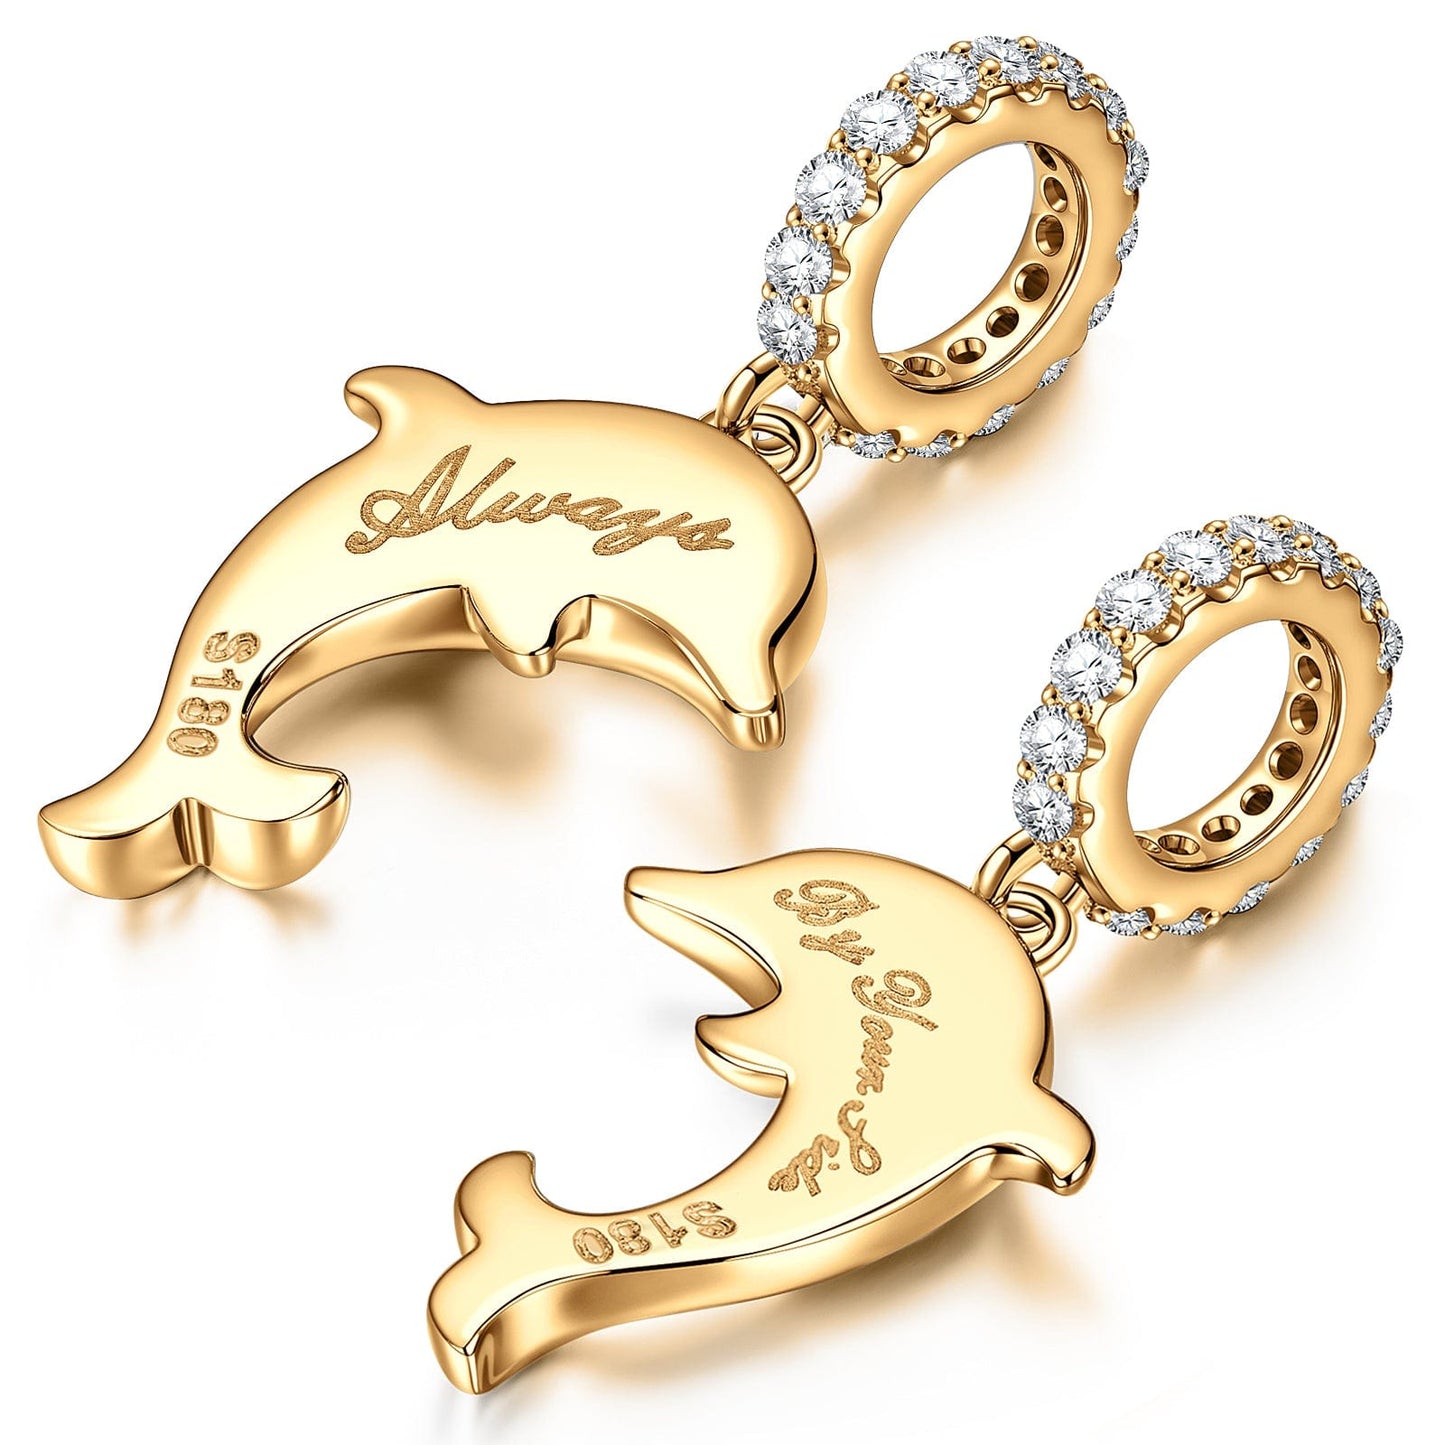 Leaping Dolphins Tarnish-resistant Silver Charms With Enamel In 14K Gold Plated